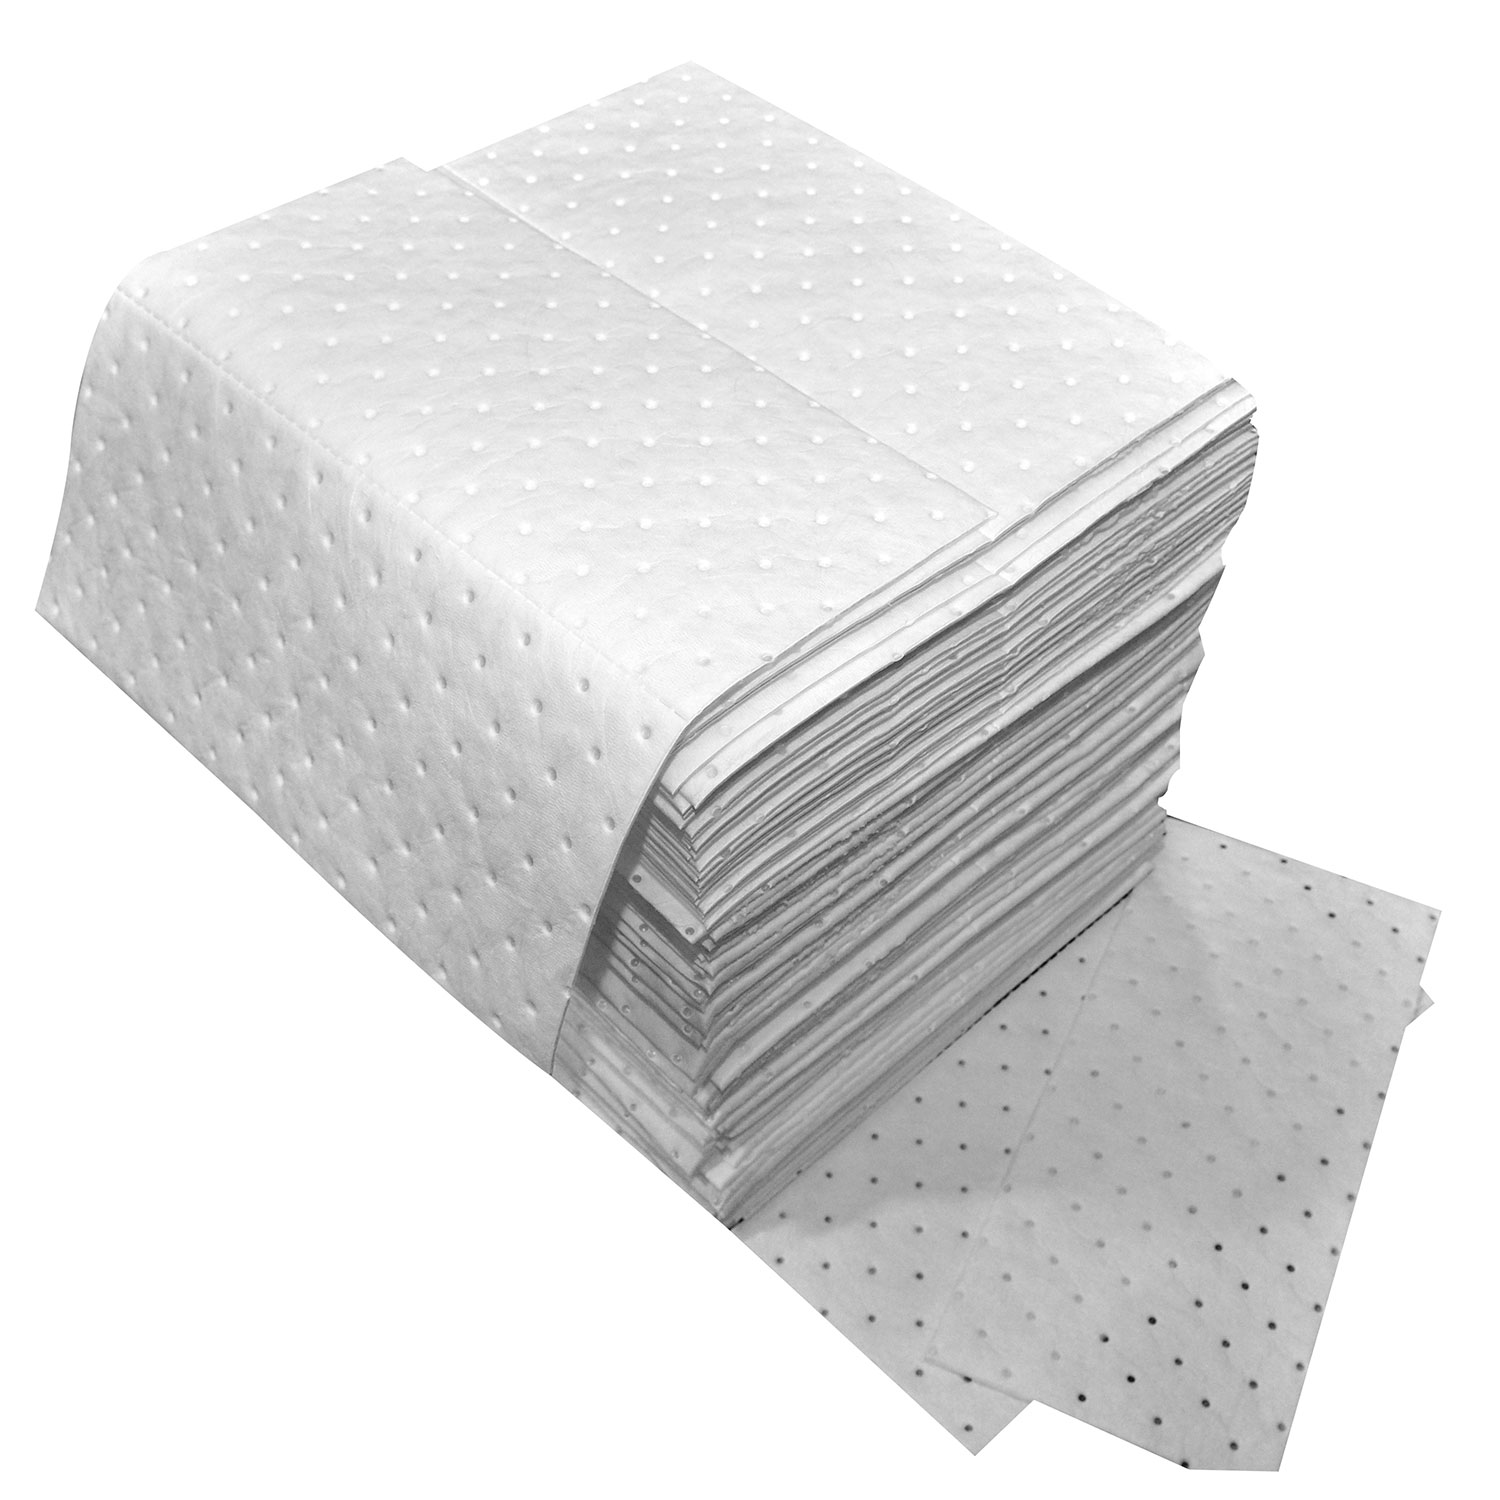 https://www.absorbentsforless.com/images/PO/Spilfyter-16--x-18--Standard-White-Oil-Only-MW-Absorbent-Pad-100-Box.jpg